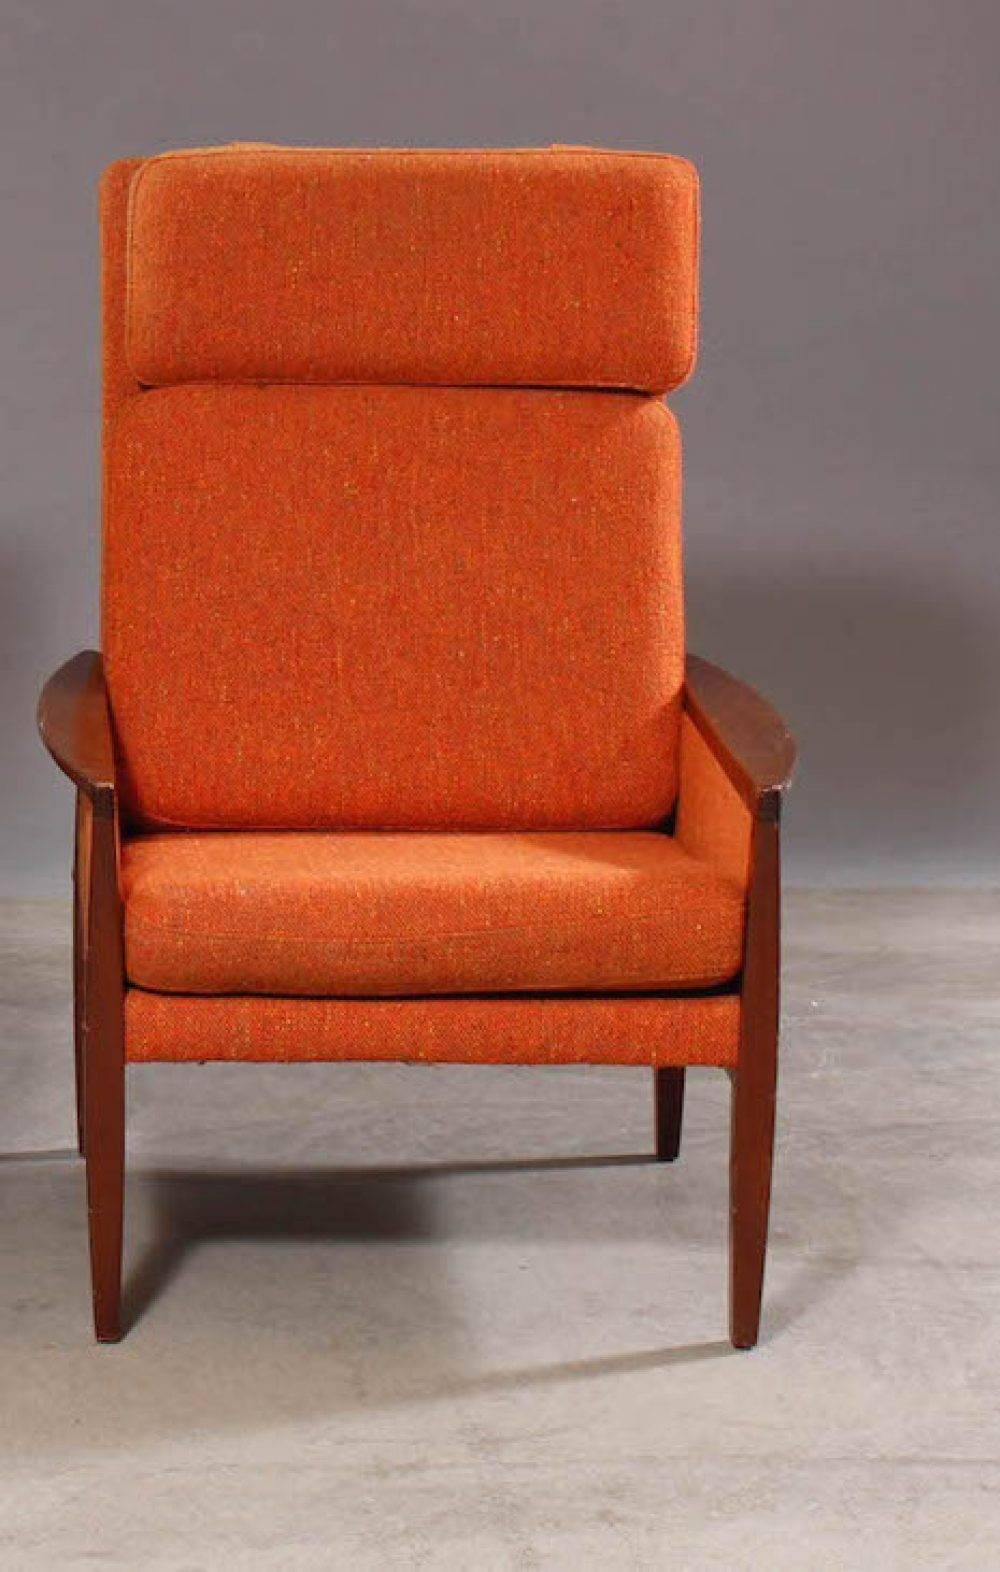 Mahogany high armchairs with removable cushions upholstered in orange fabric.
Measures: H 105 cm, B 85 cm, D 78 cm.
Danish furniture manufacturer.
Some scratches.